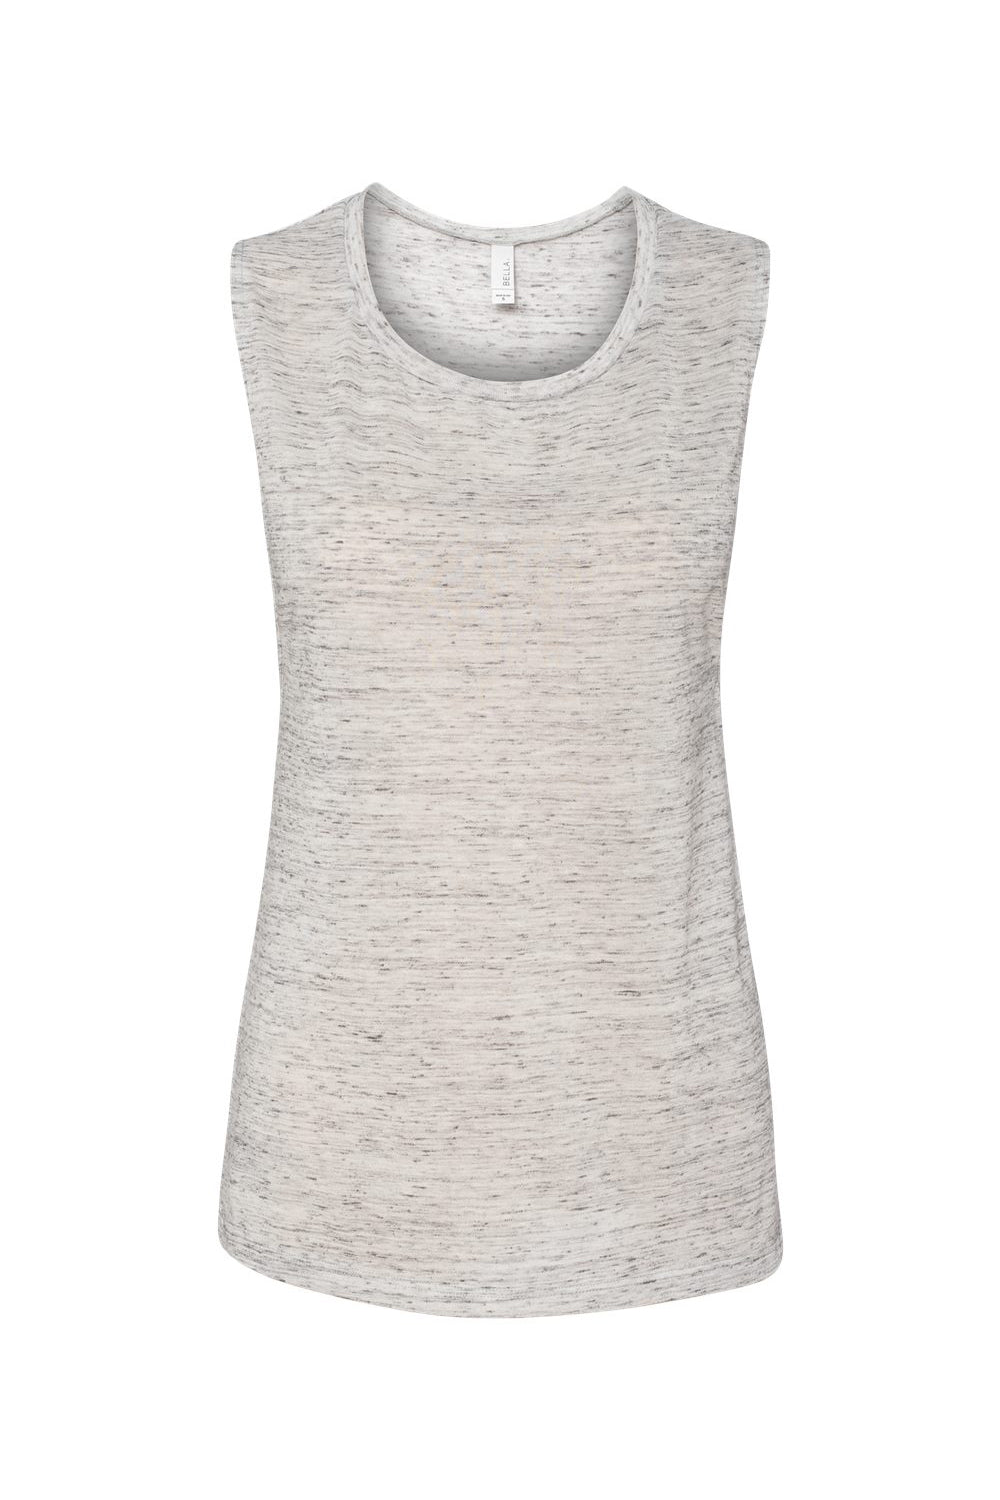 Bella + Canvas BC8803/B8803/8803 Womens Flowy Muscle Tank Top White Marble Flat Front